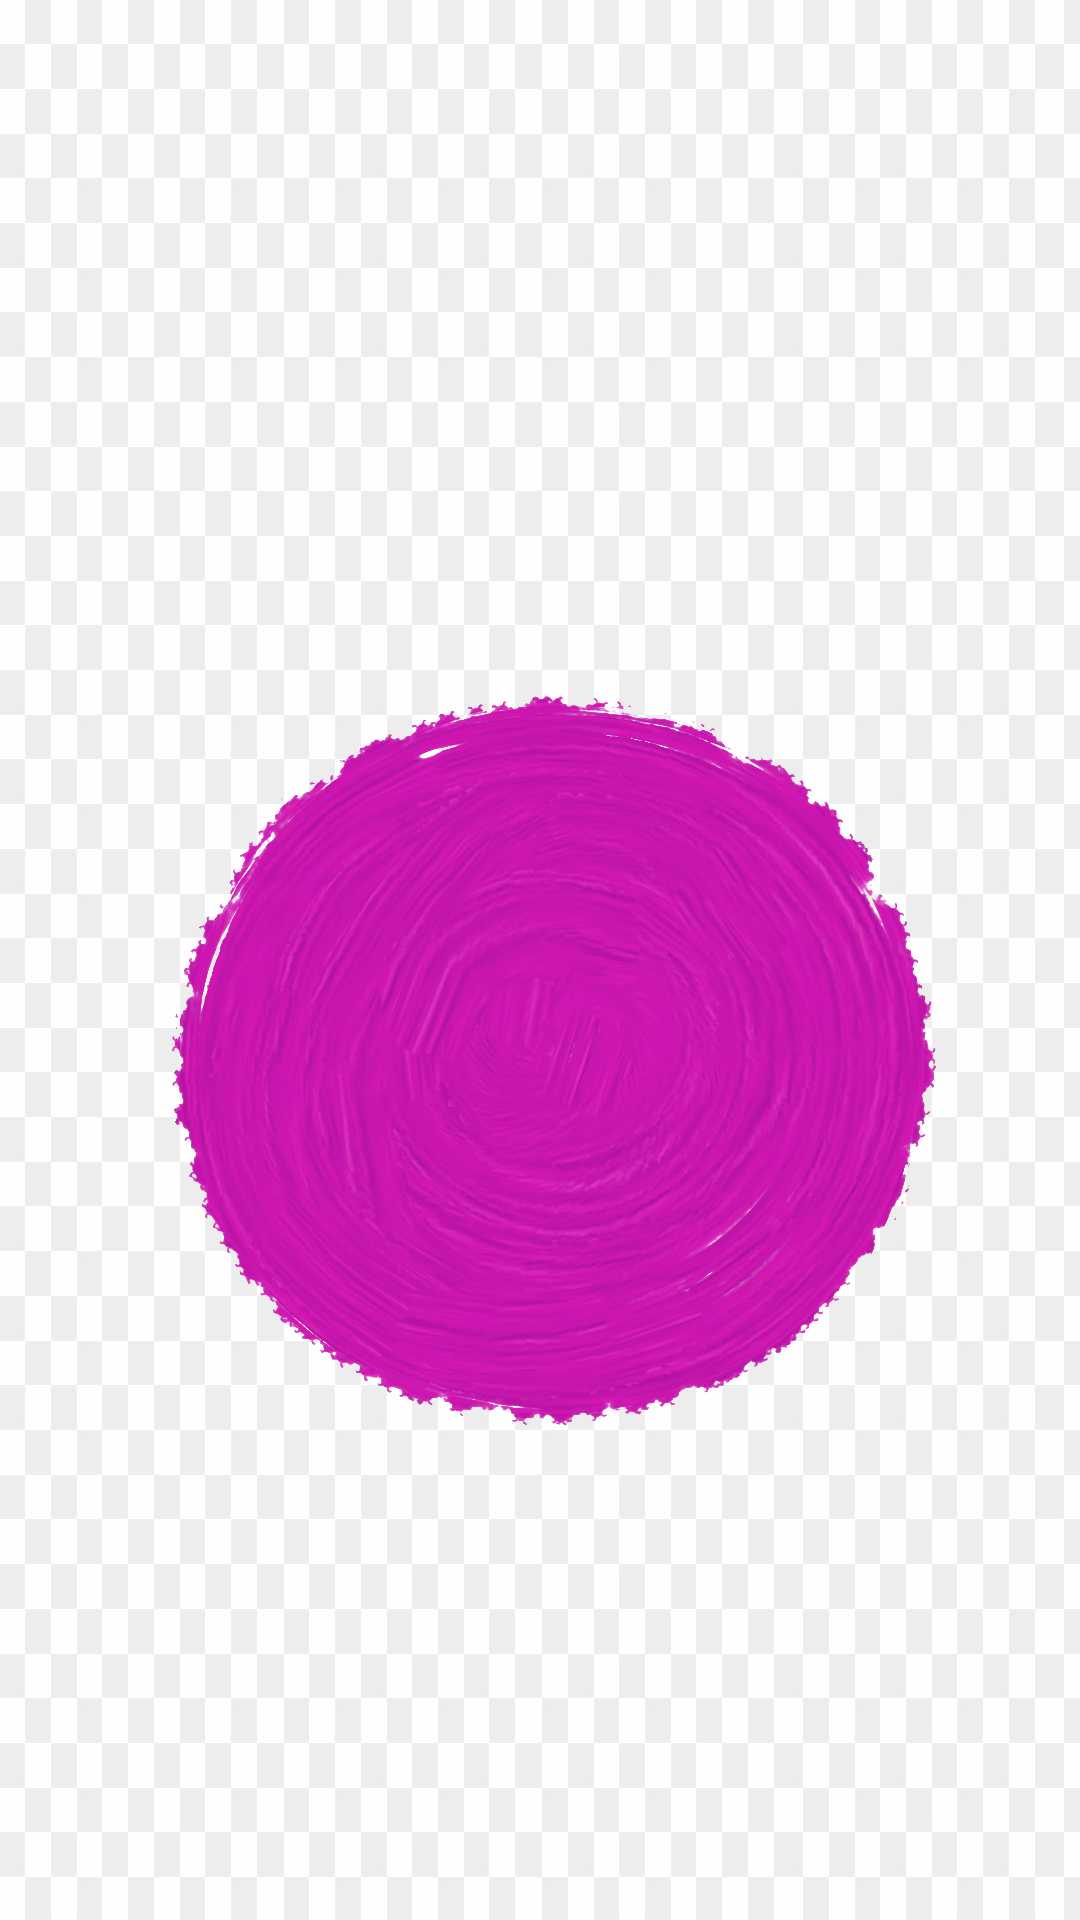 Round brush png images